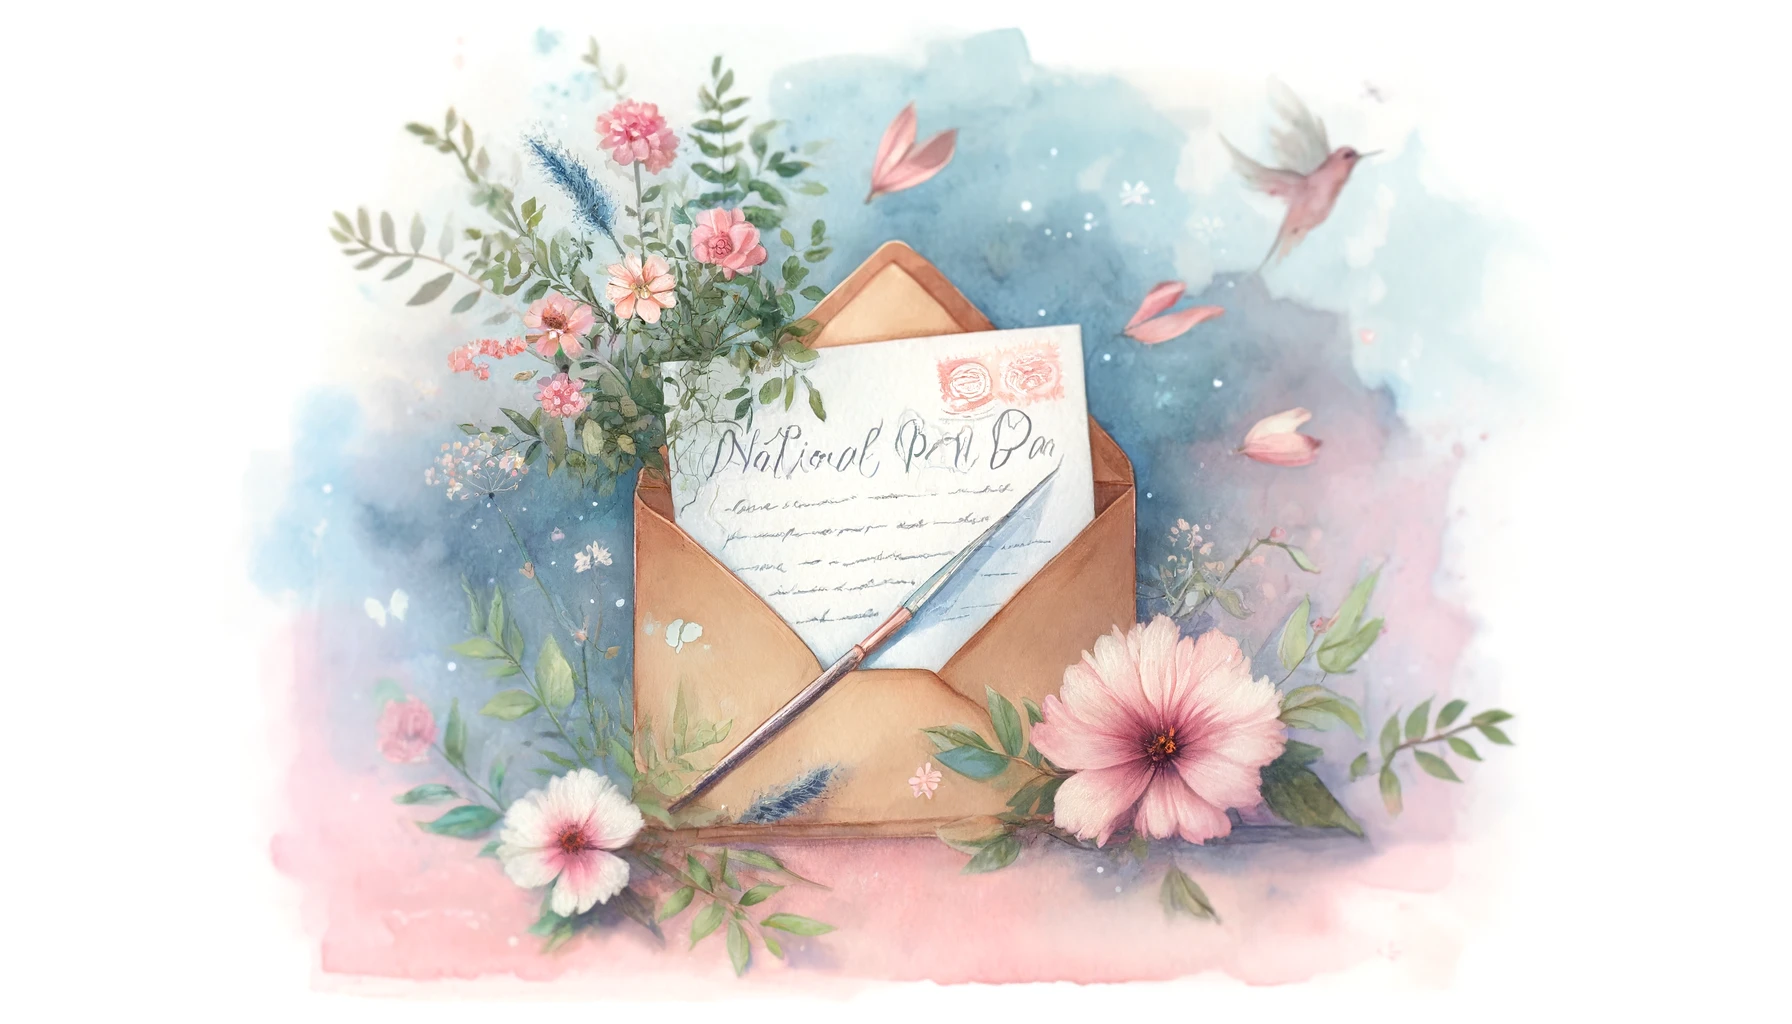 Cherished Pen Pal Day Quotes to Share with Your Pen Friend